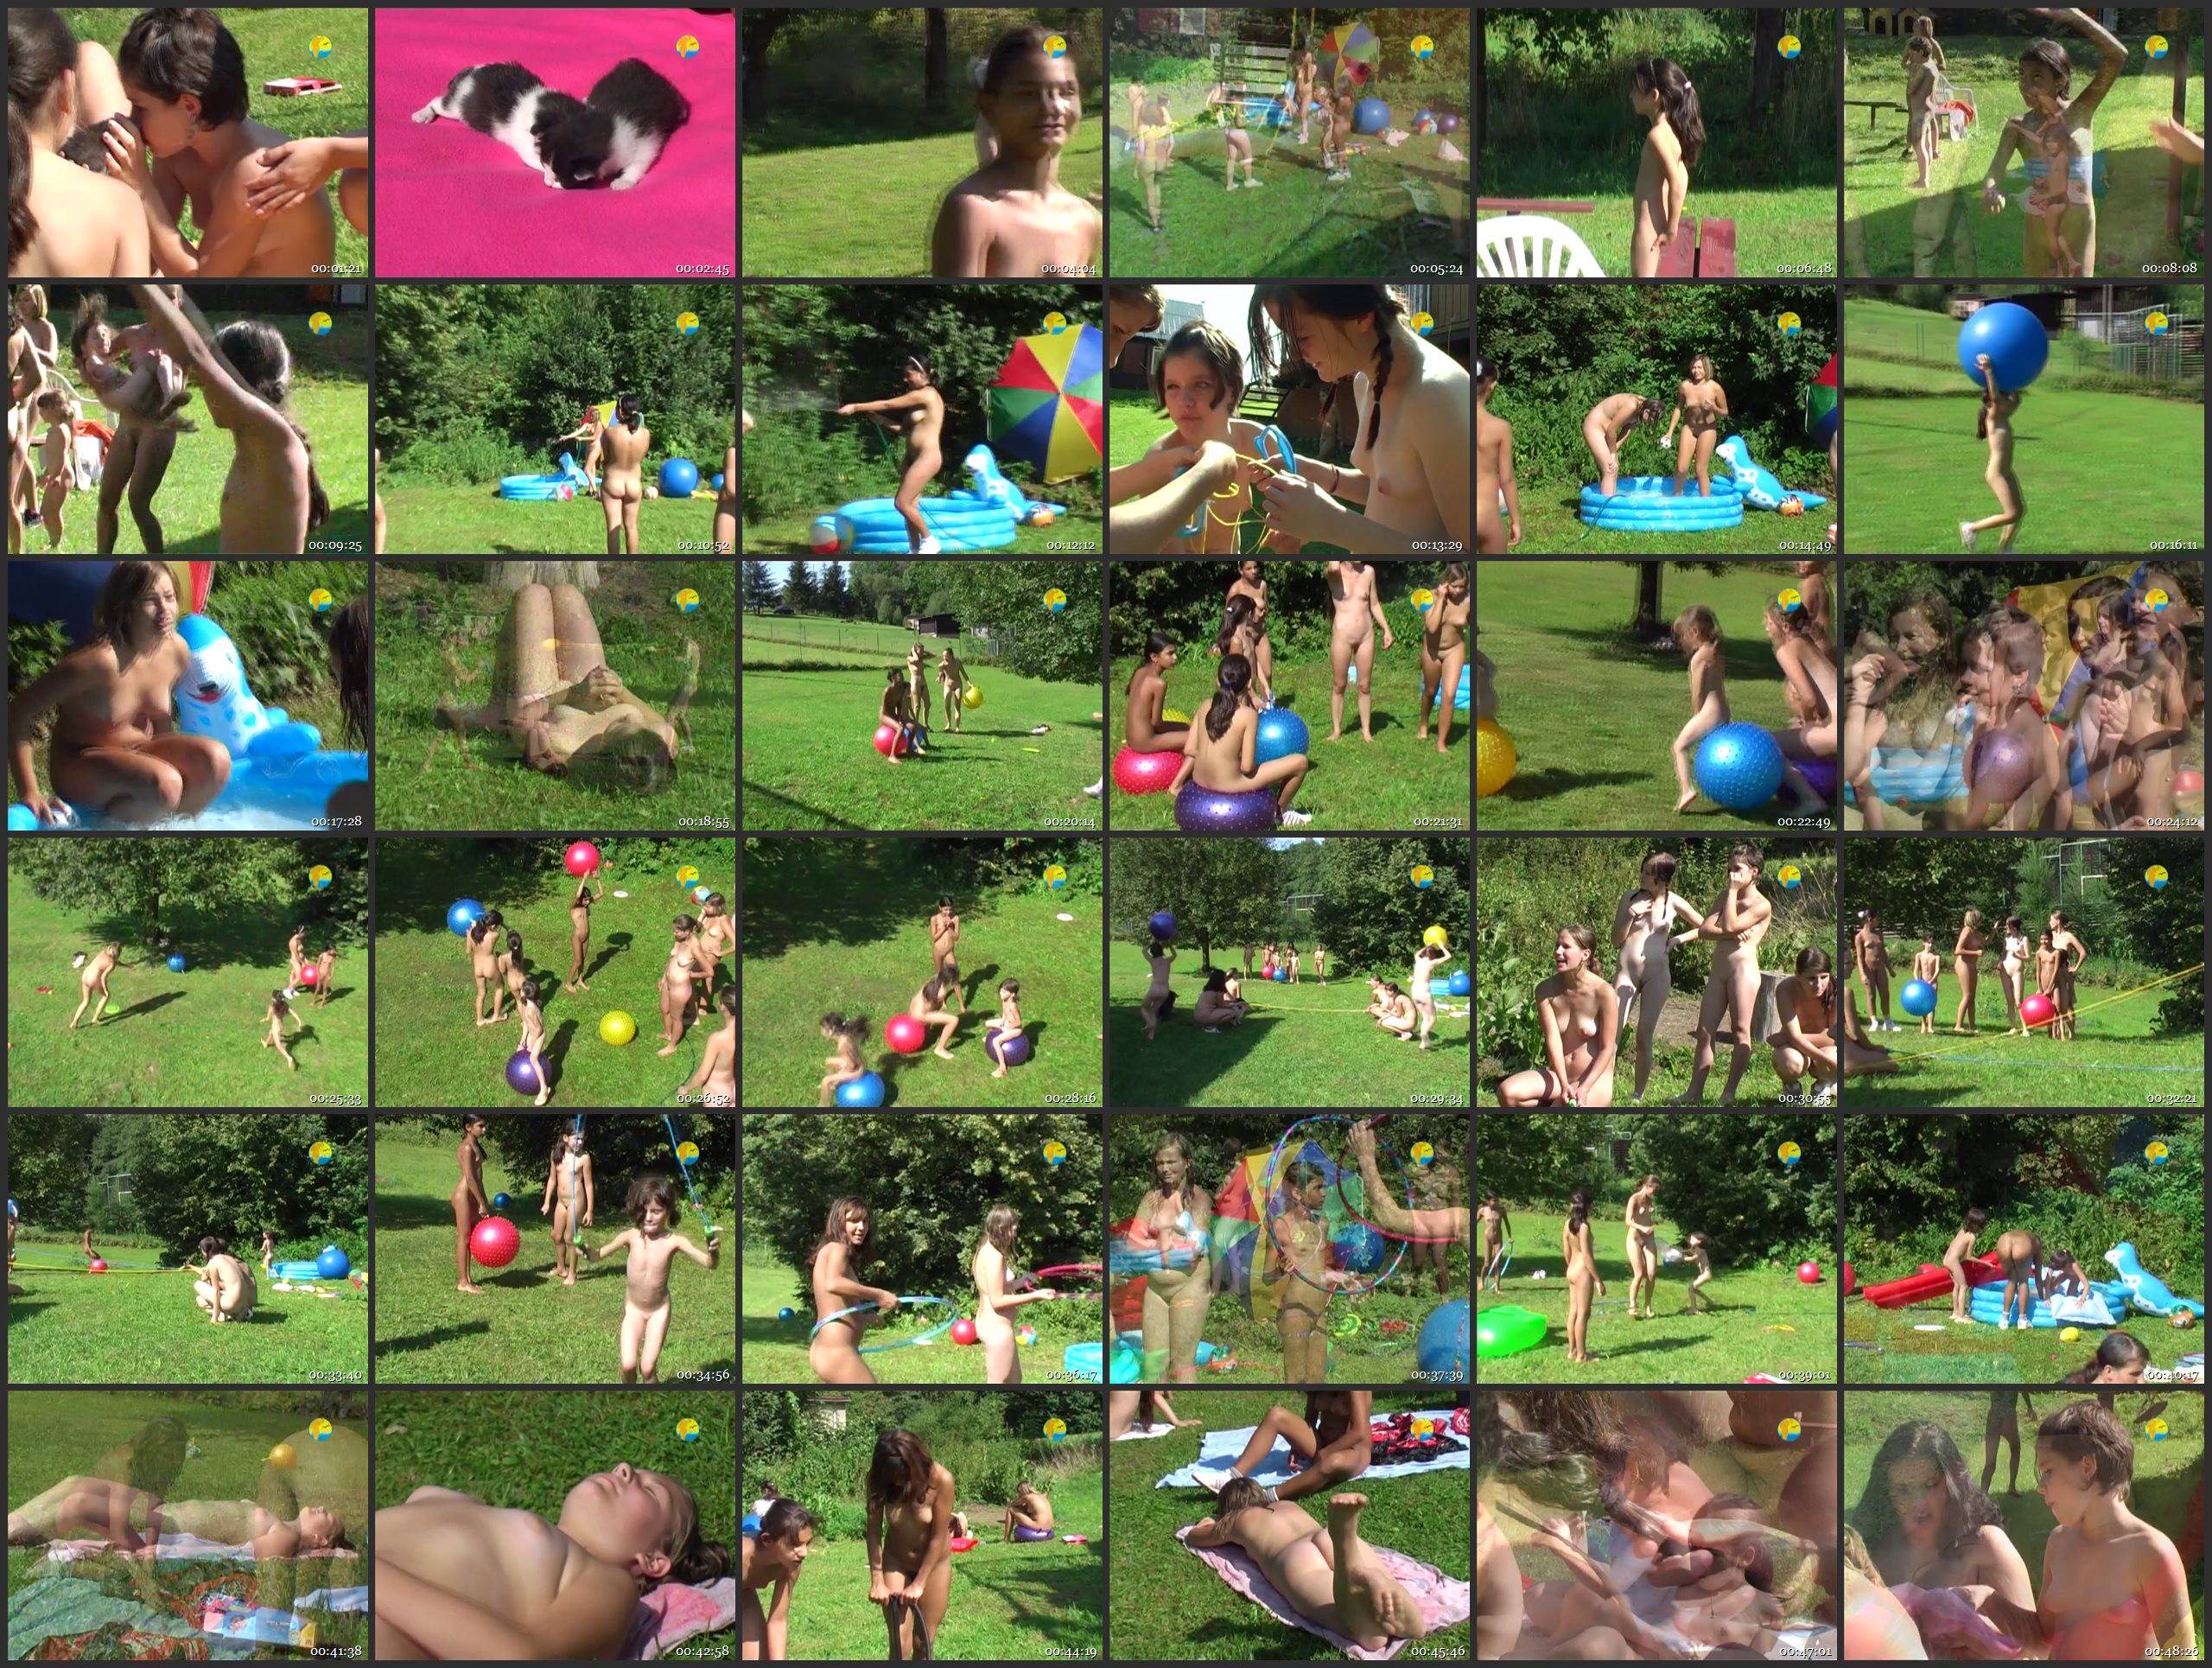 Naturist Freedom Games at a Meadow - Thumbnails